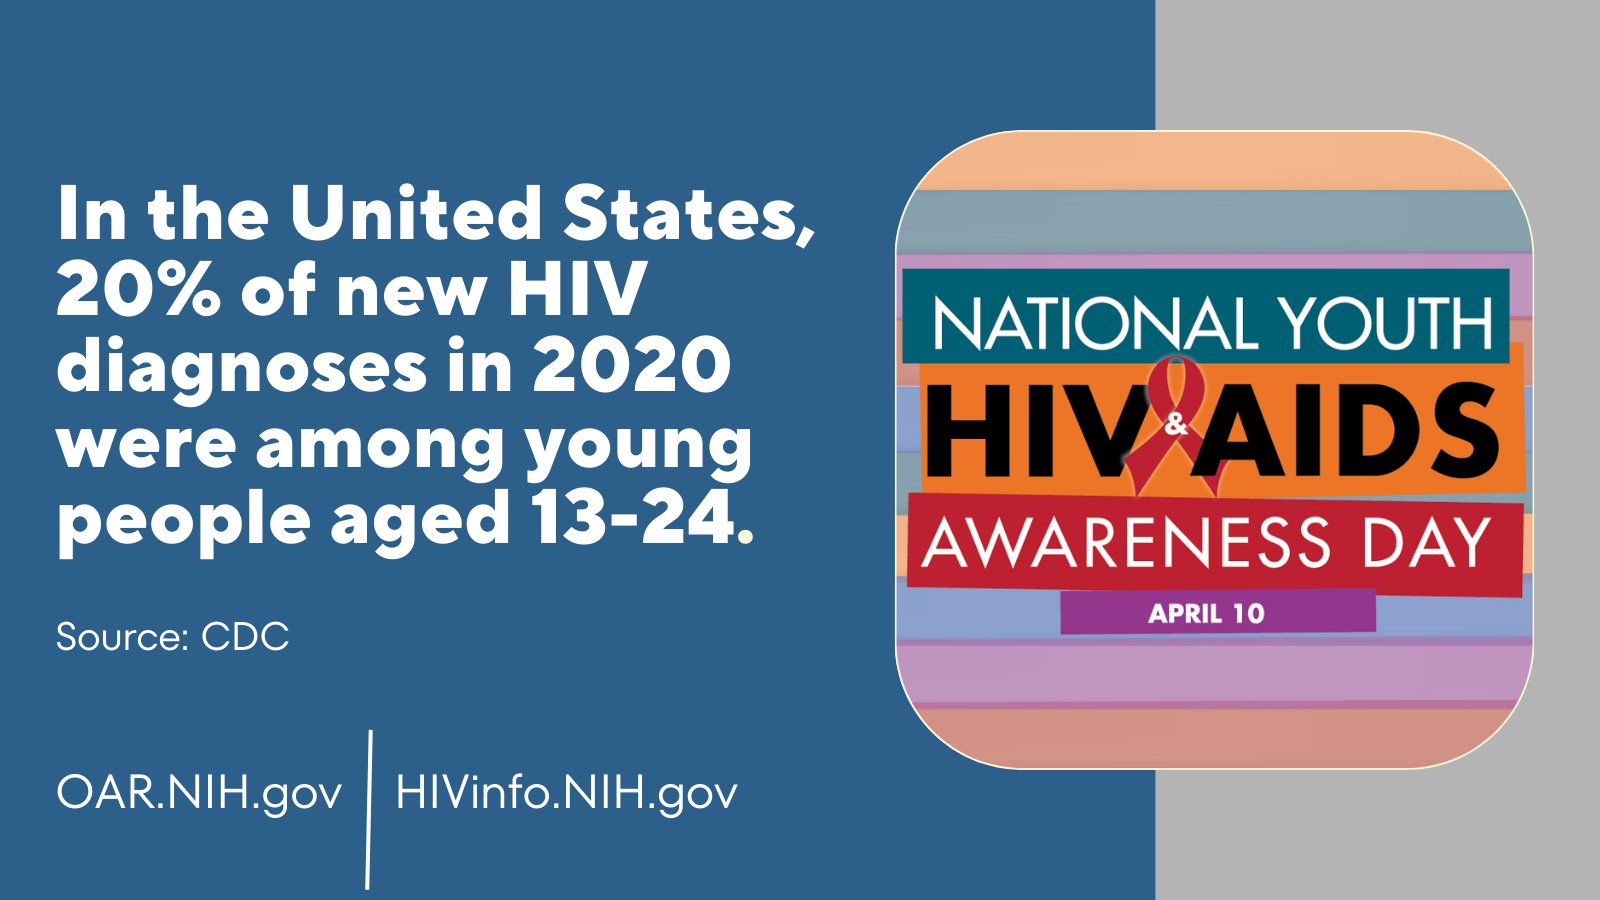 HRSA Recognizes National Gay Men's HIV/AIDS Awareness Day